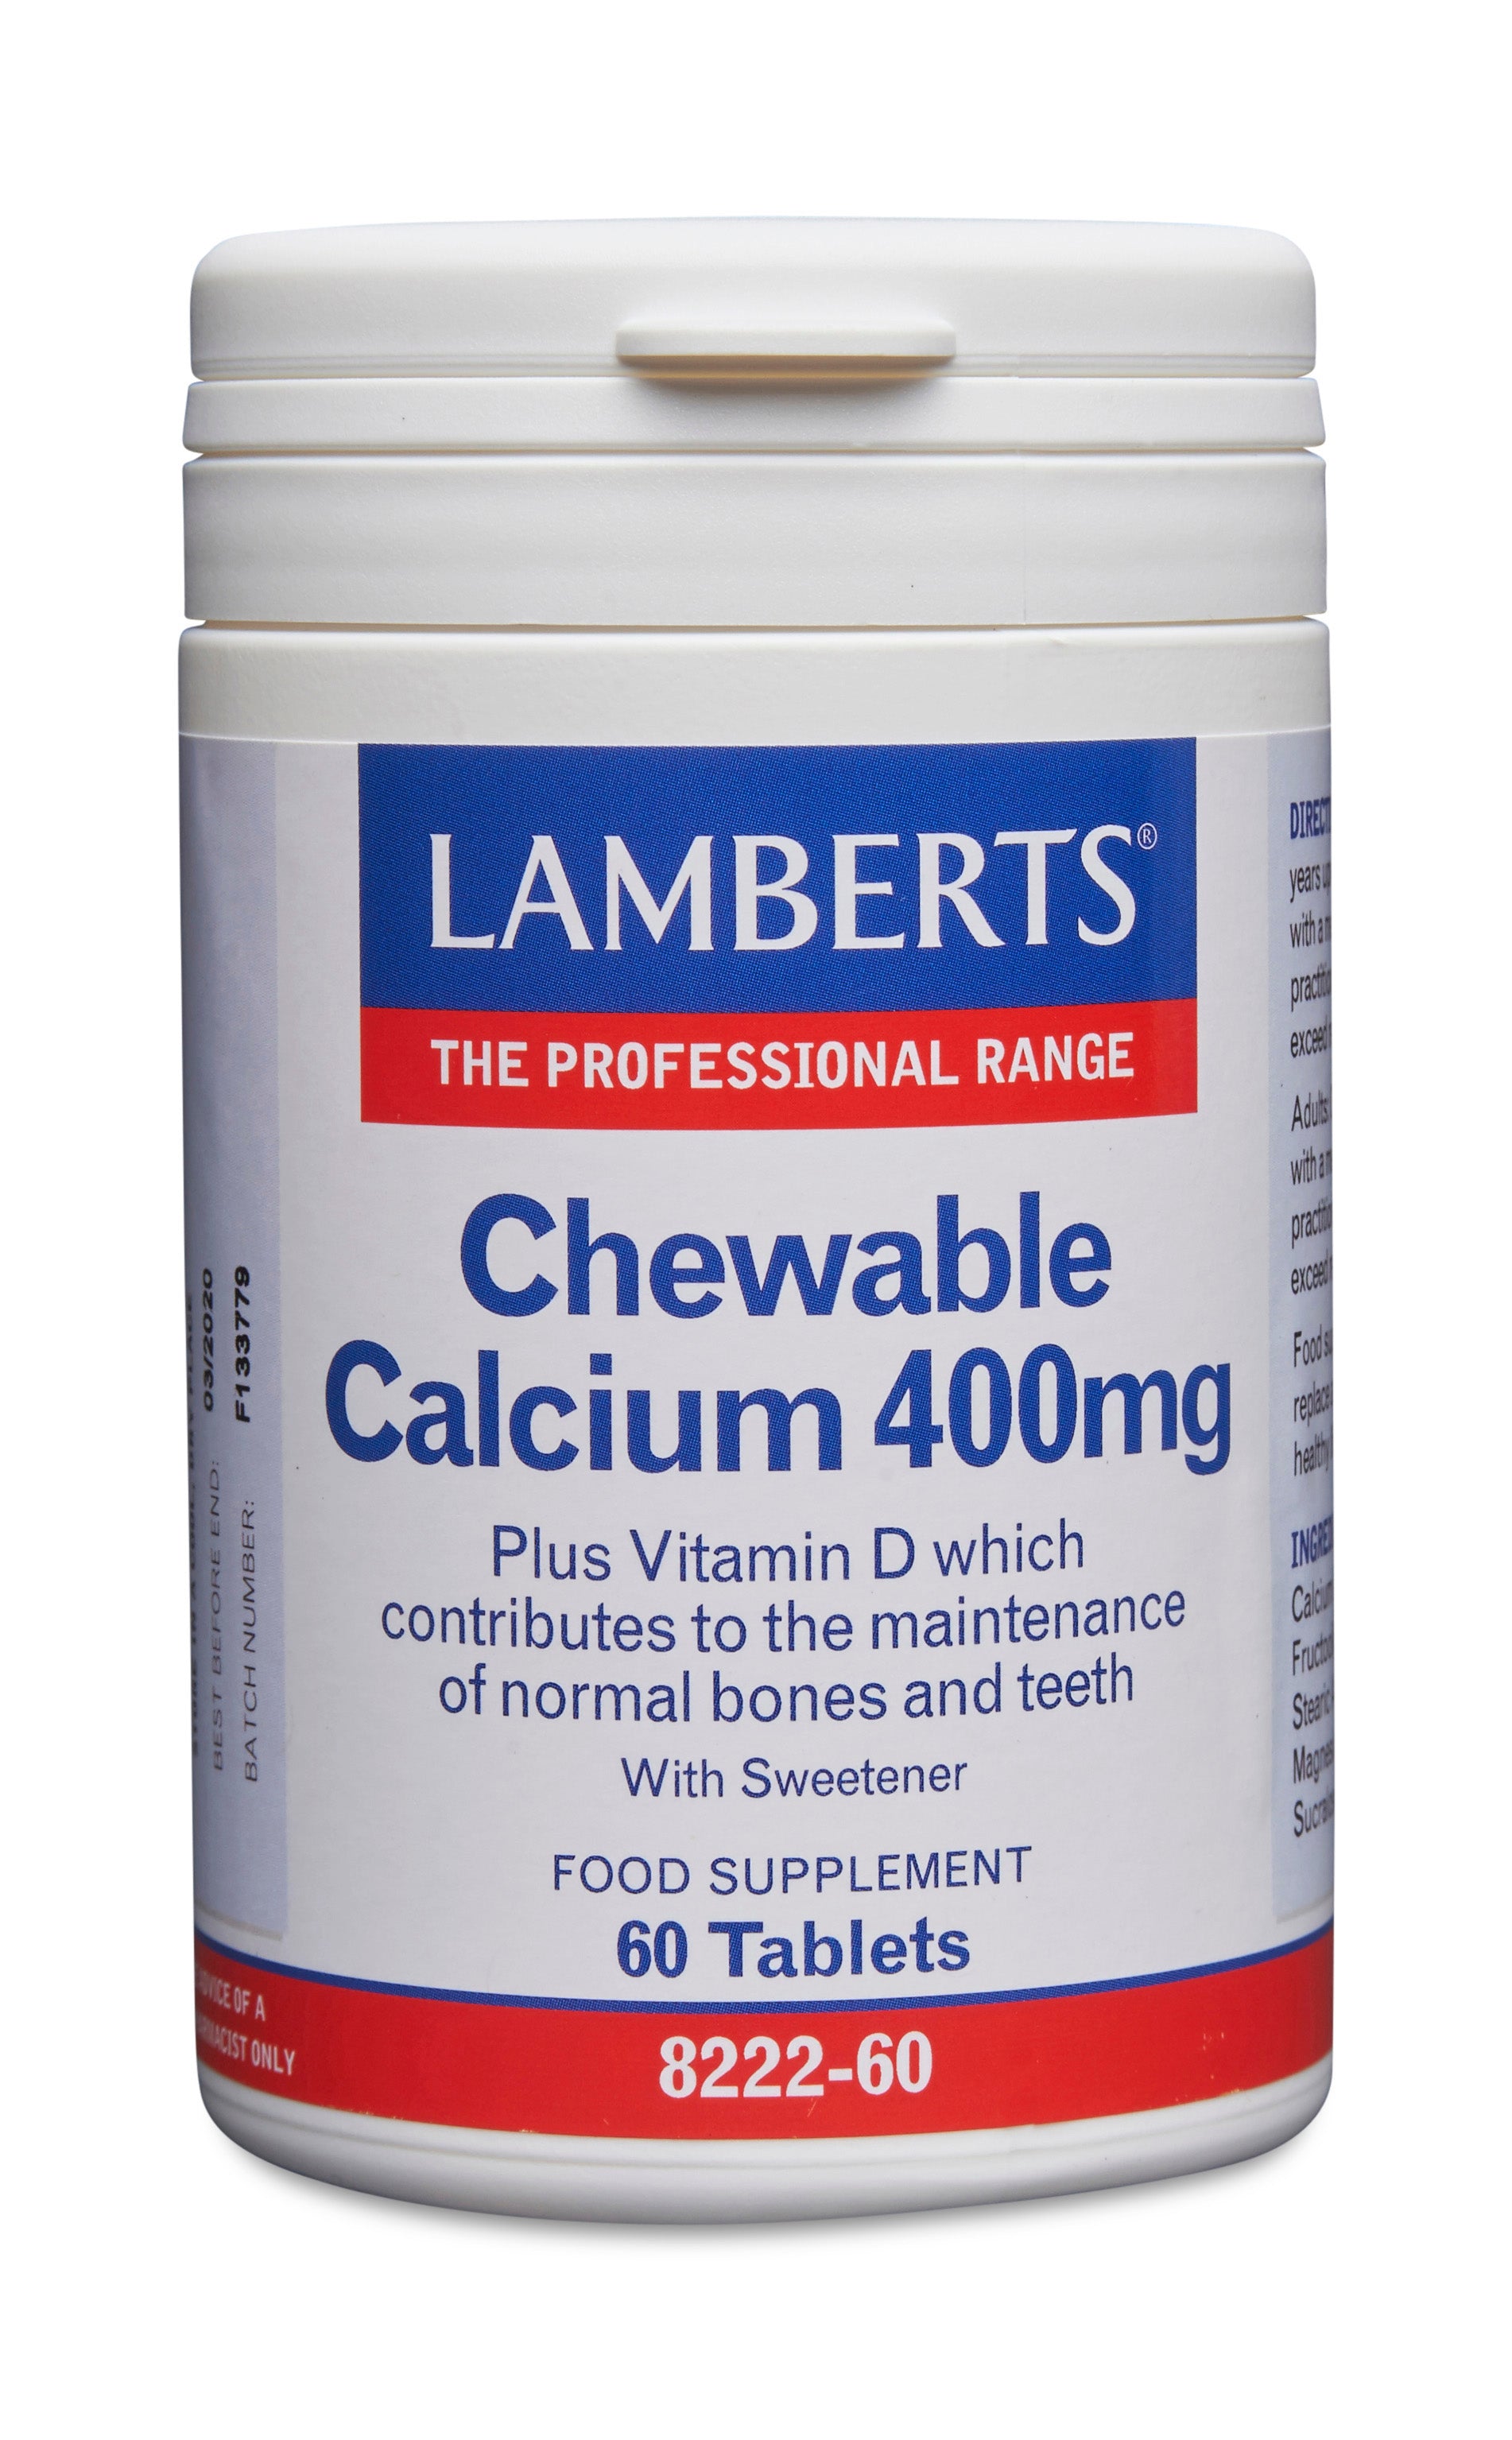 lamberts - 60 Tablets Chewable Calcium 400mg